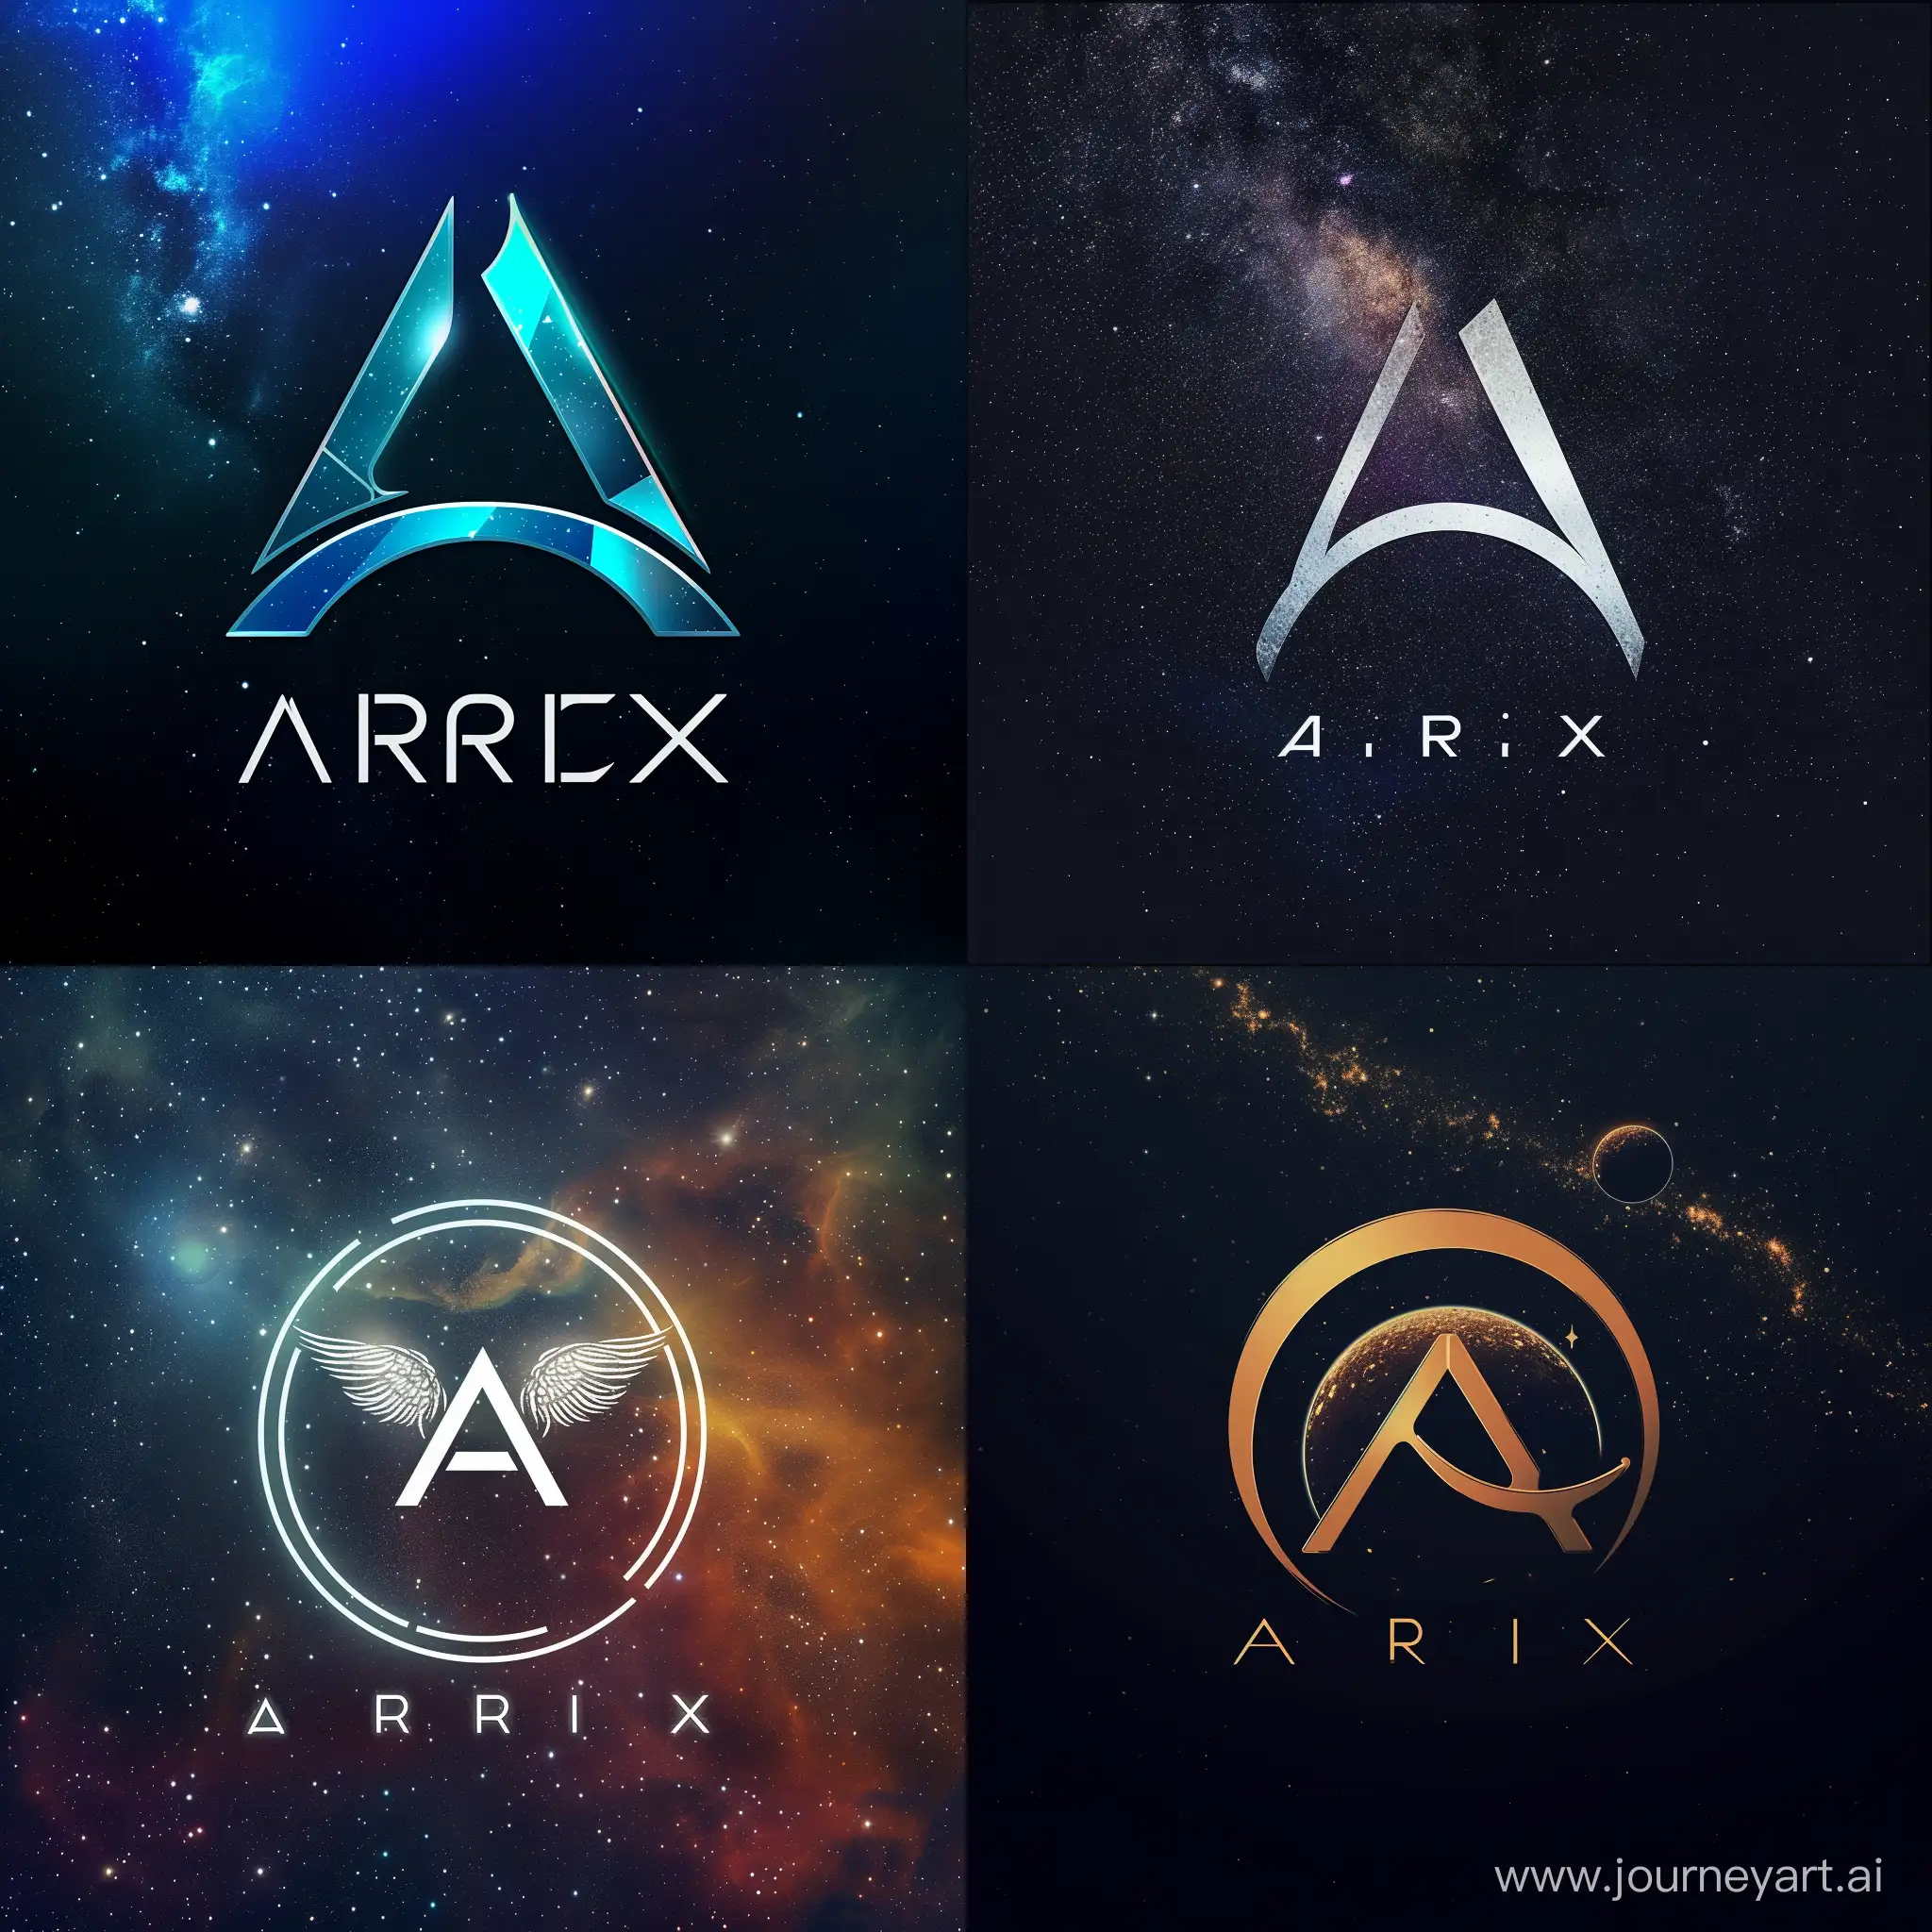 Make a logo for (Arix) in space